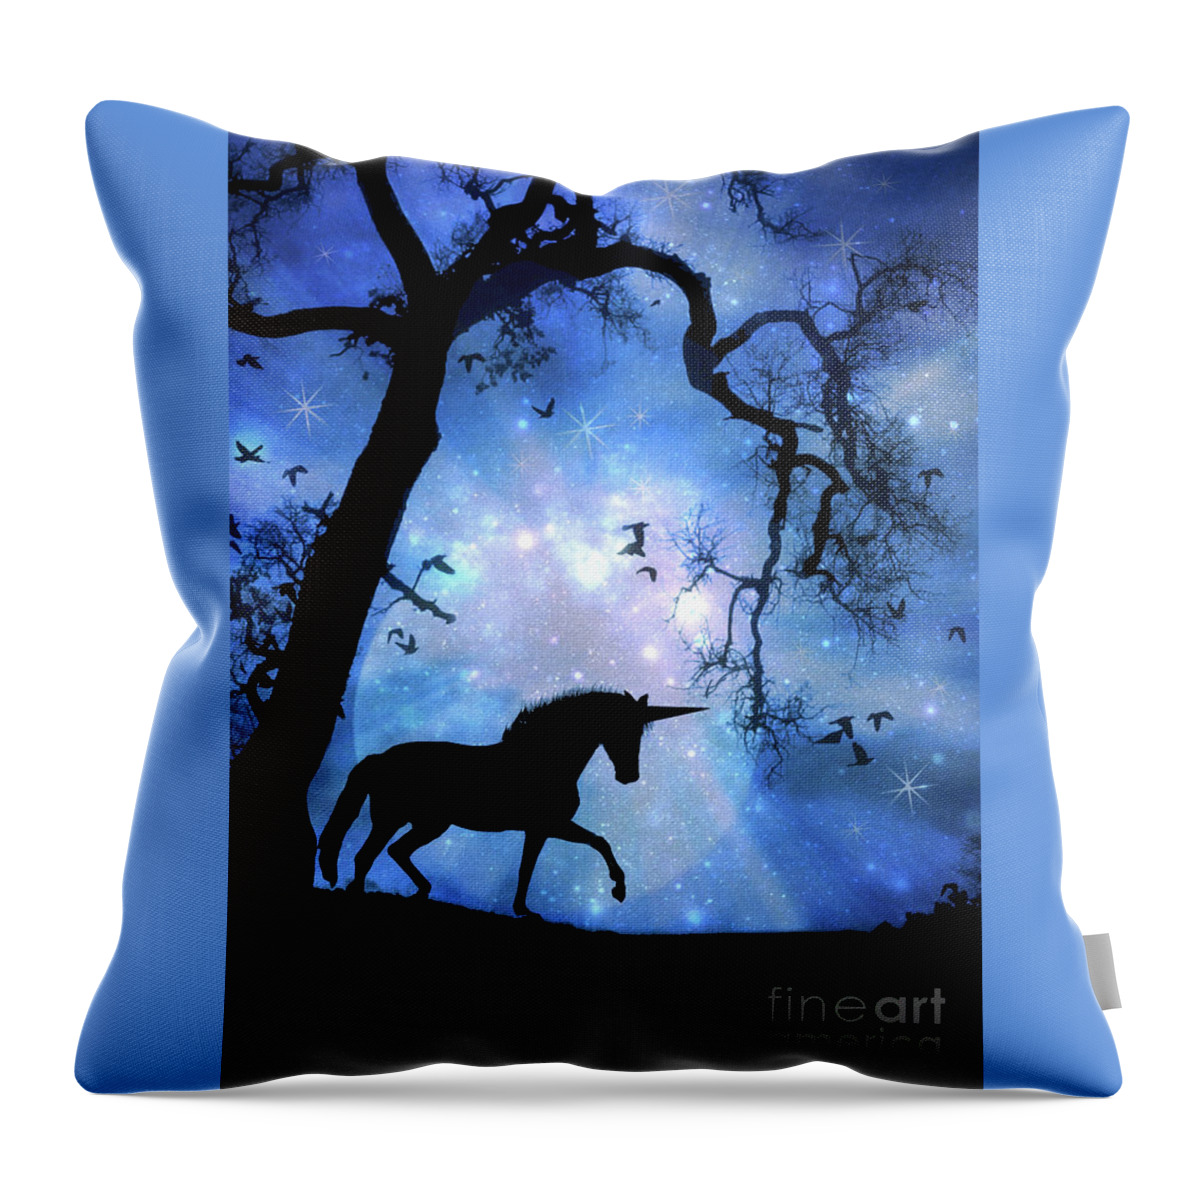 Unicorn Throw Pillow featuring the photograph Fantasy Unicorn by Stephanie Laird